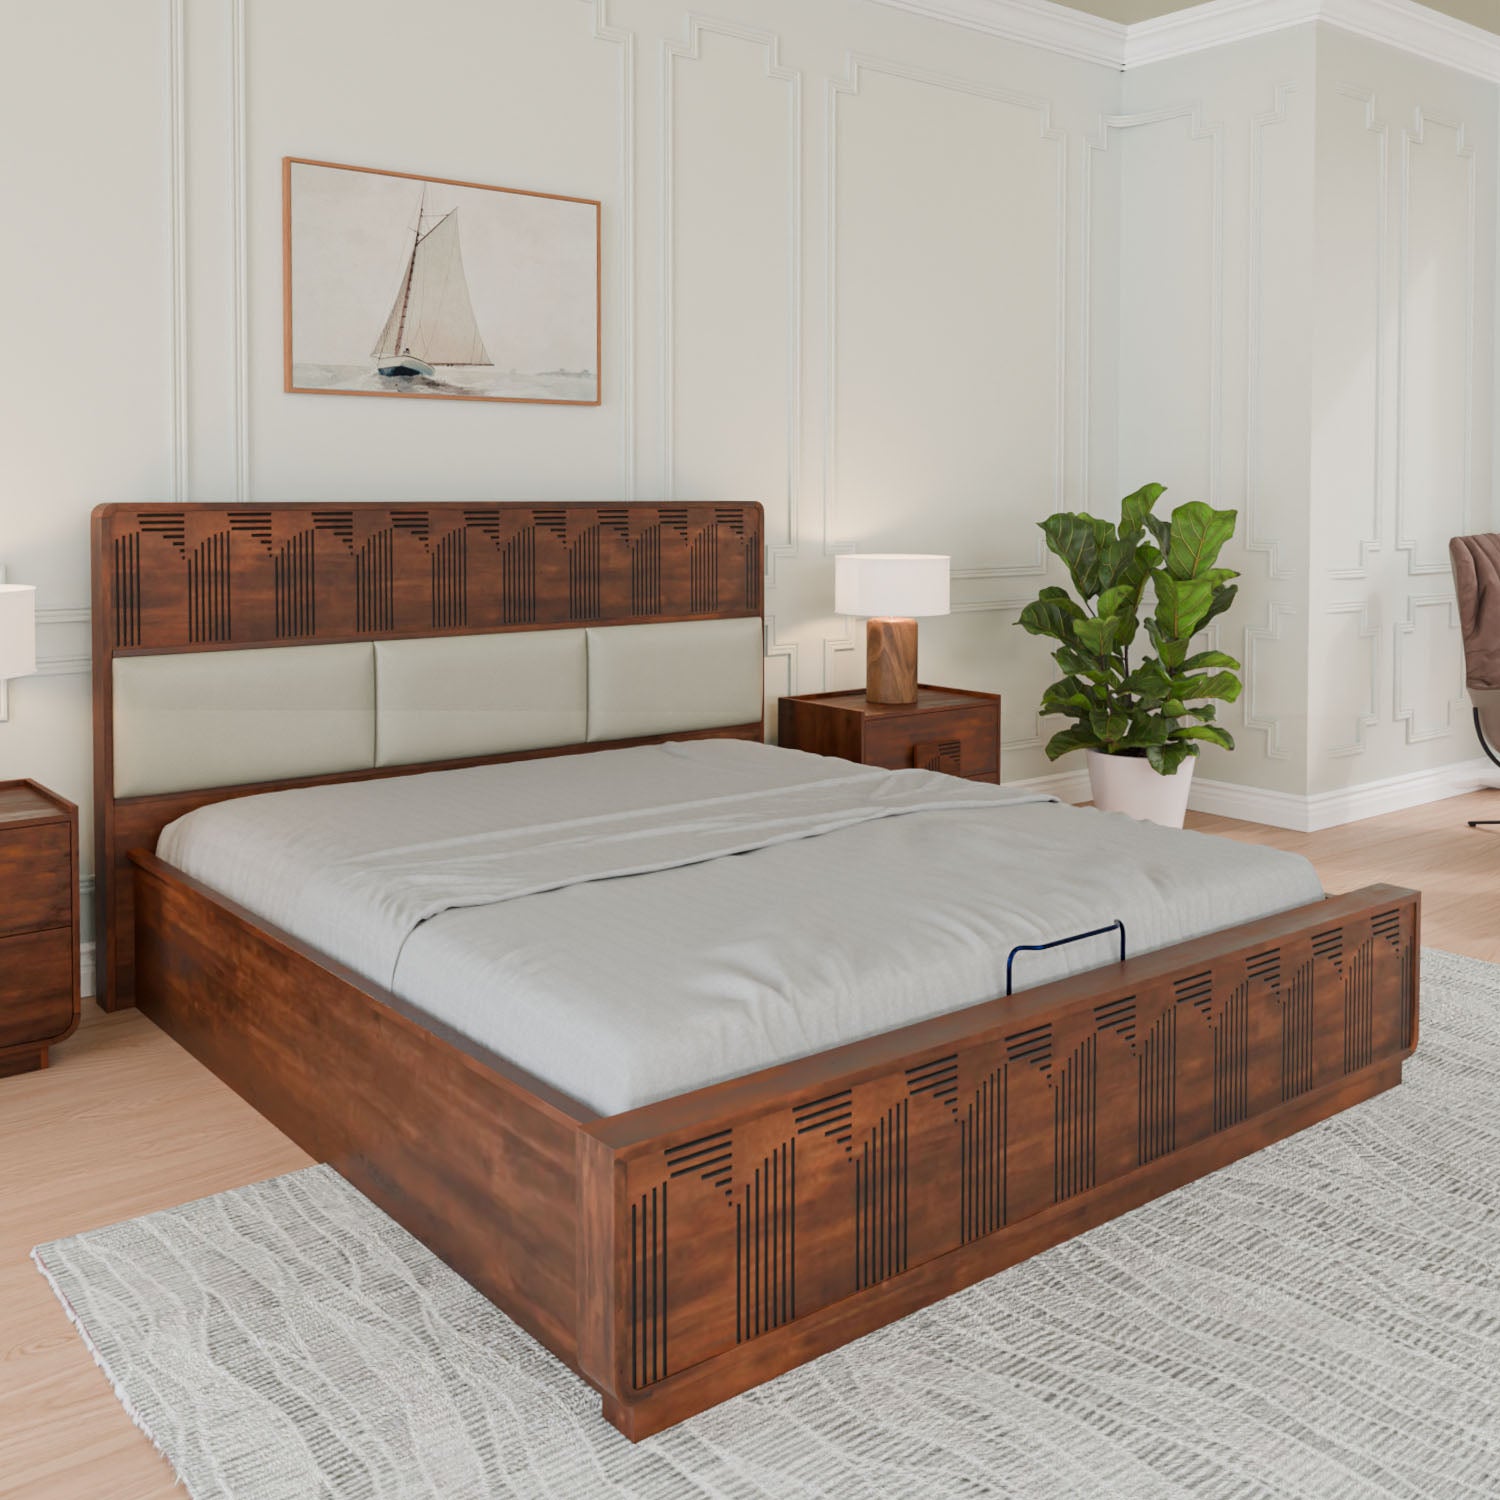 Albury King Bed with Hydraulic Storage (Antique Cherry)